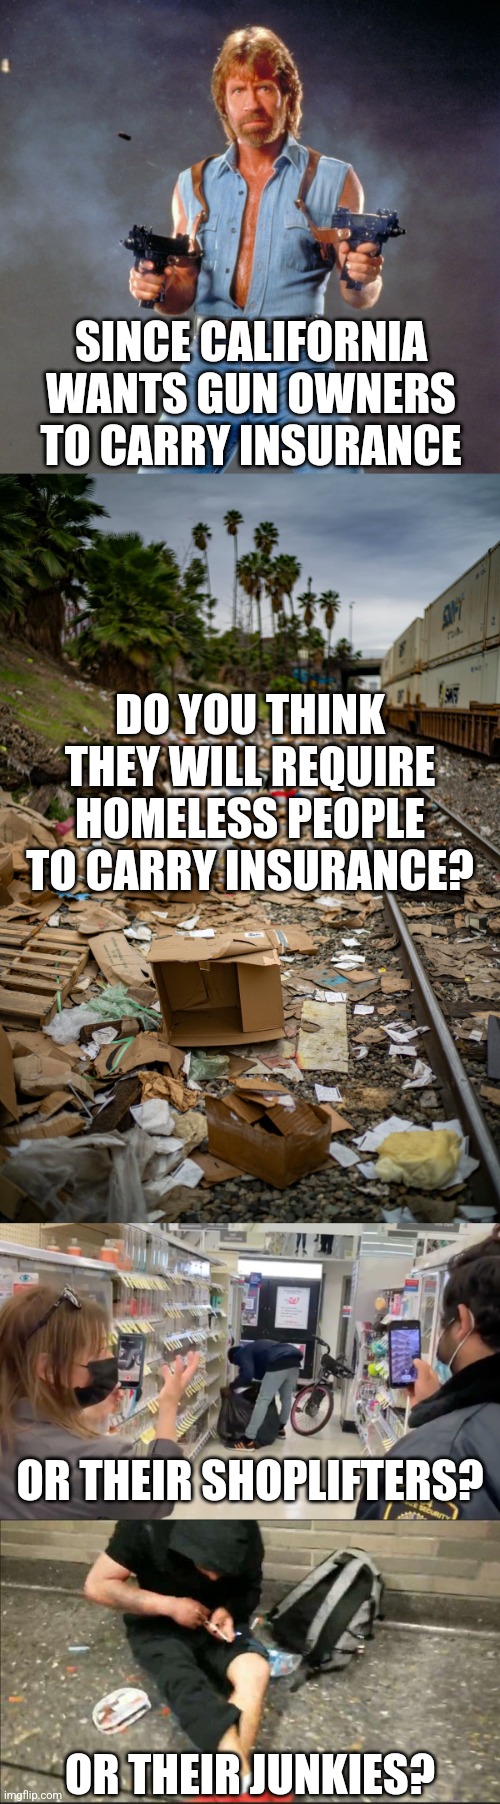 Hey if we are just trying to make people pay their fair share, make everyone pay! | SINCE CALIFORNIA WANTS GUN OWNERS TO CARRY INSURANCE; DO YOU THINK THEY WILL REQUIRE HOMELESS PEOPLE TO CARRY INSURANCE? OR THEIR SHOPLIFTERS? OR THEIR JUNKIES? | image tagged in memes,chuck norris guns,california,crazy,liberal logic | made w/ Imgflip meme maker